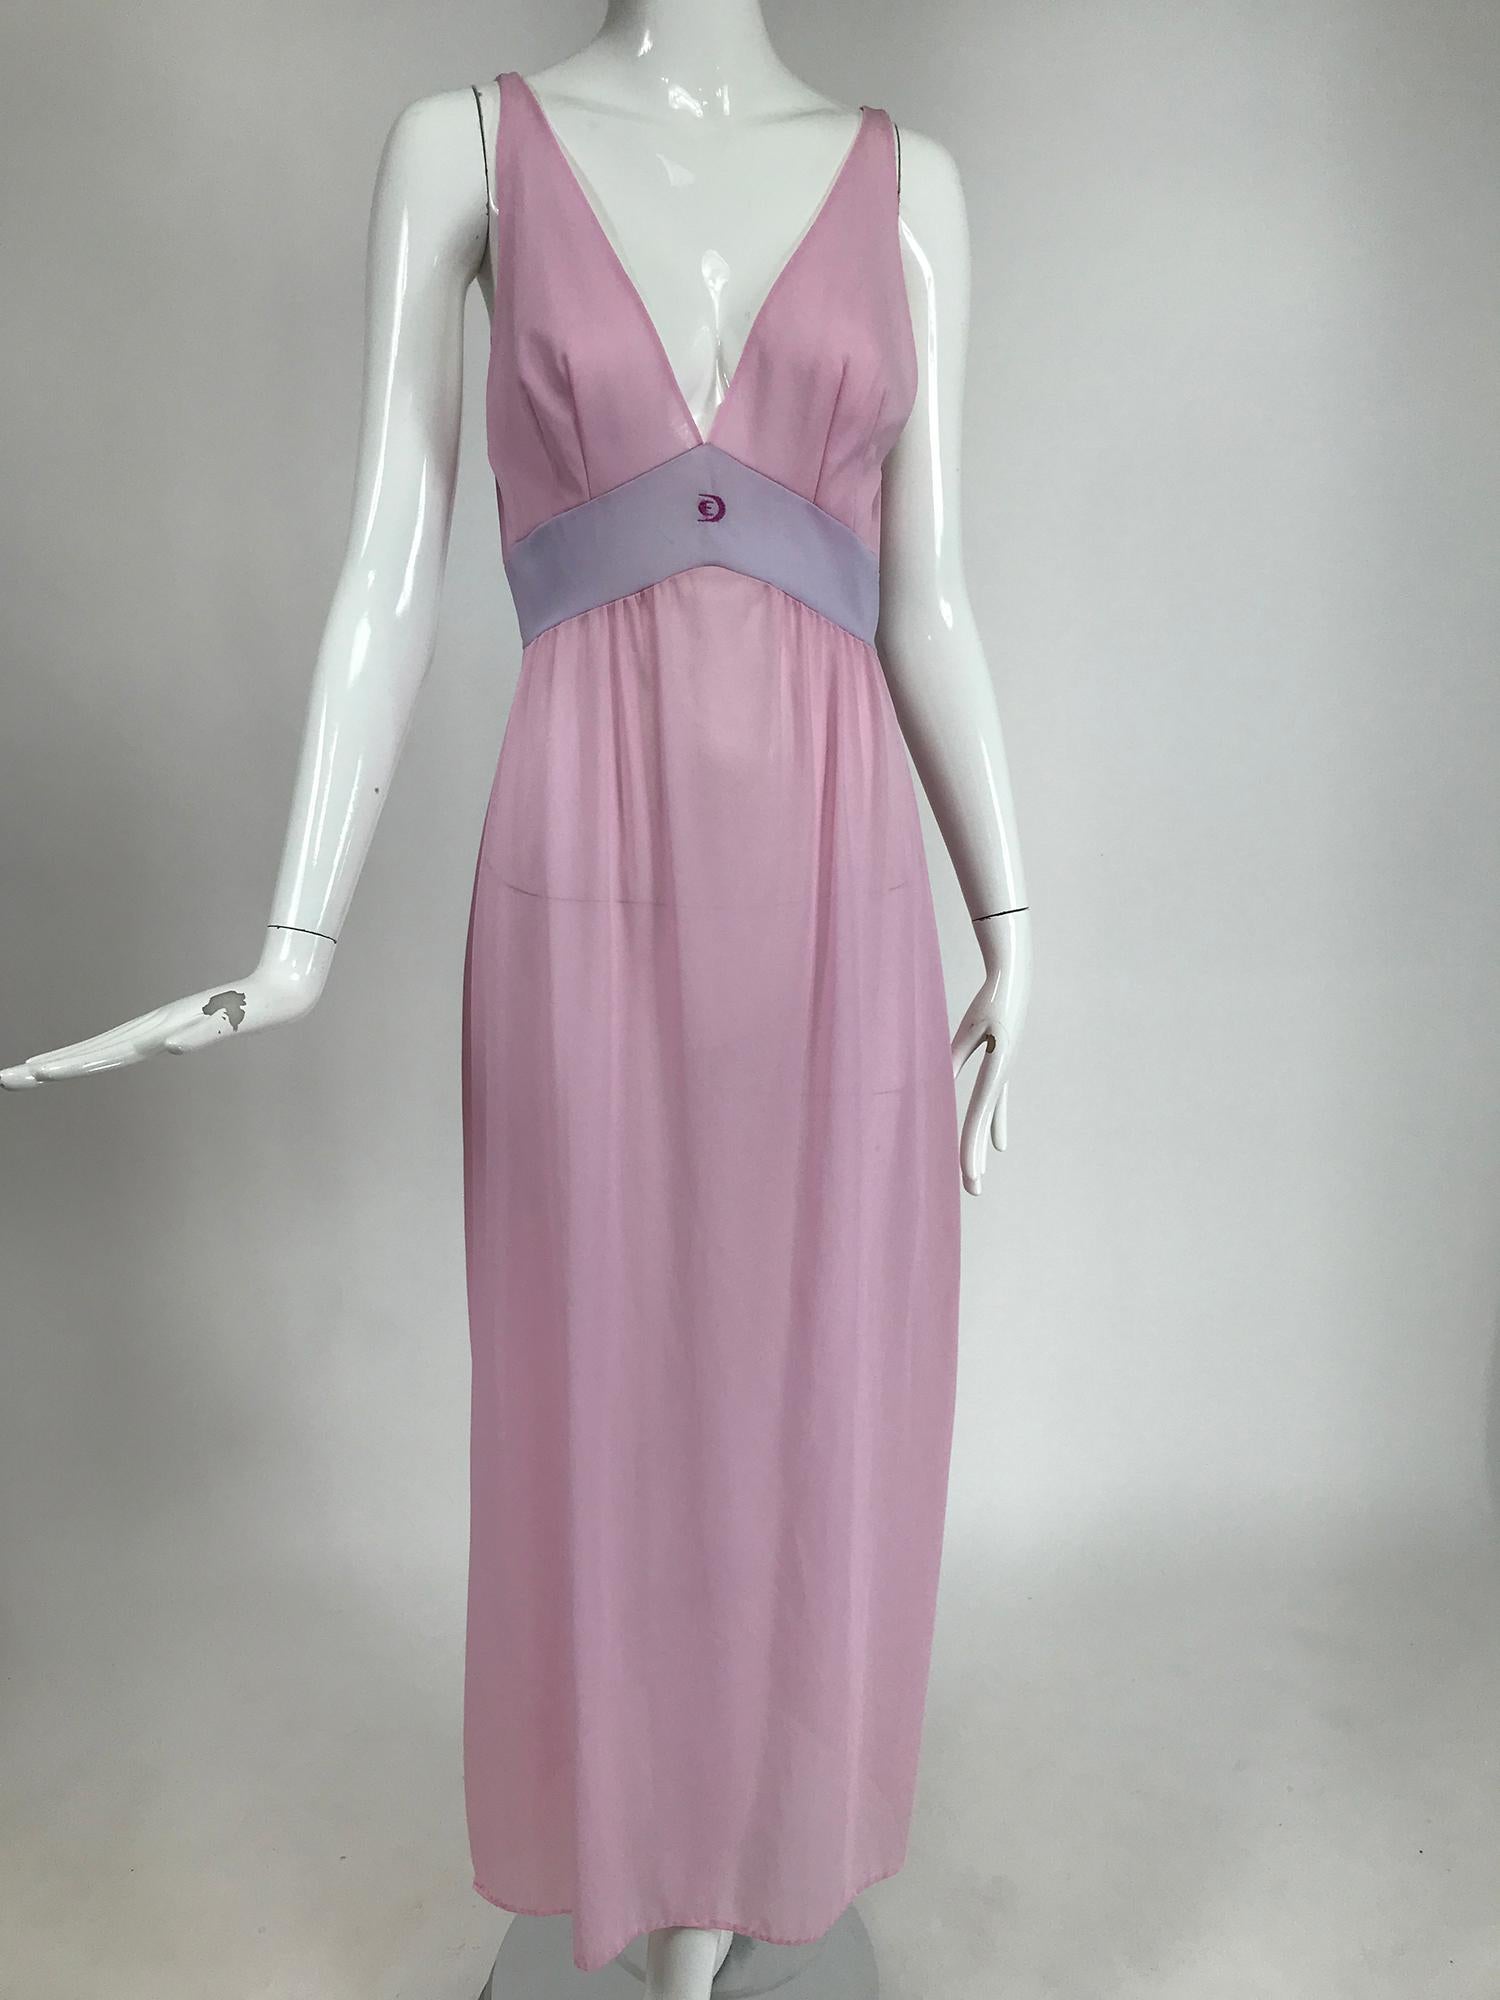 Emilio Pucci for Formfit Rogers 2pc. Sheer Peignoir Robe & Gown 1970s 3